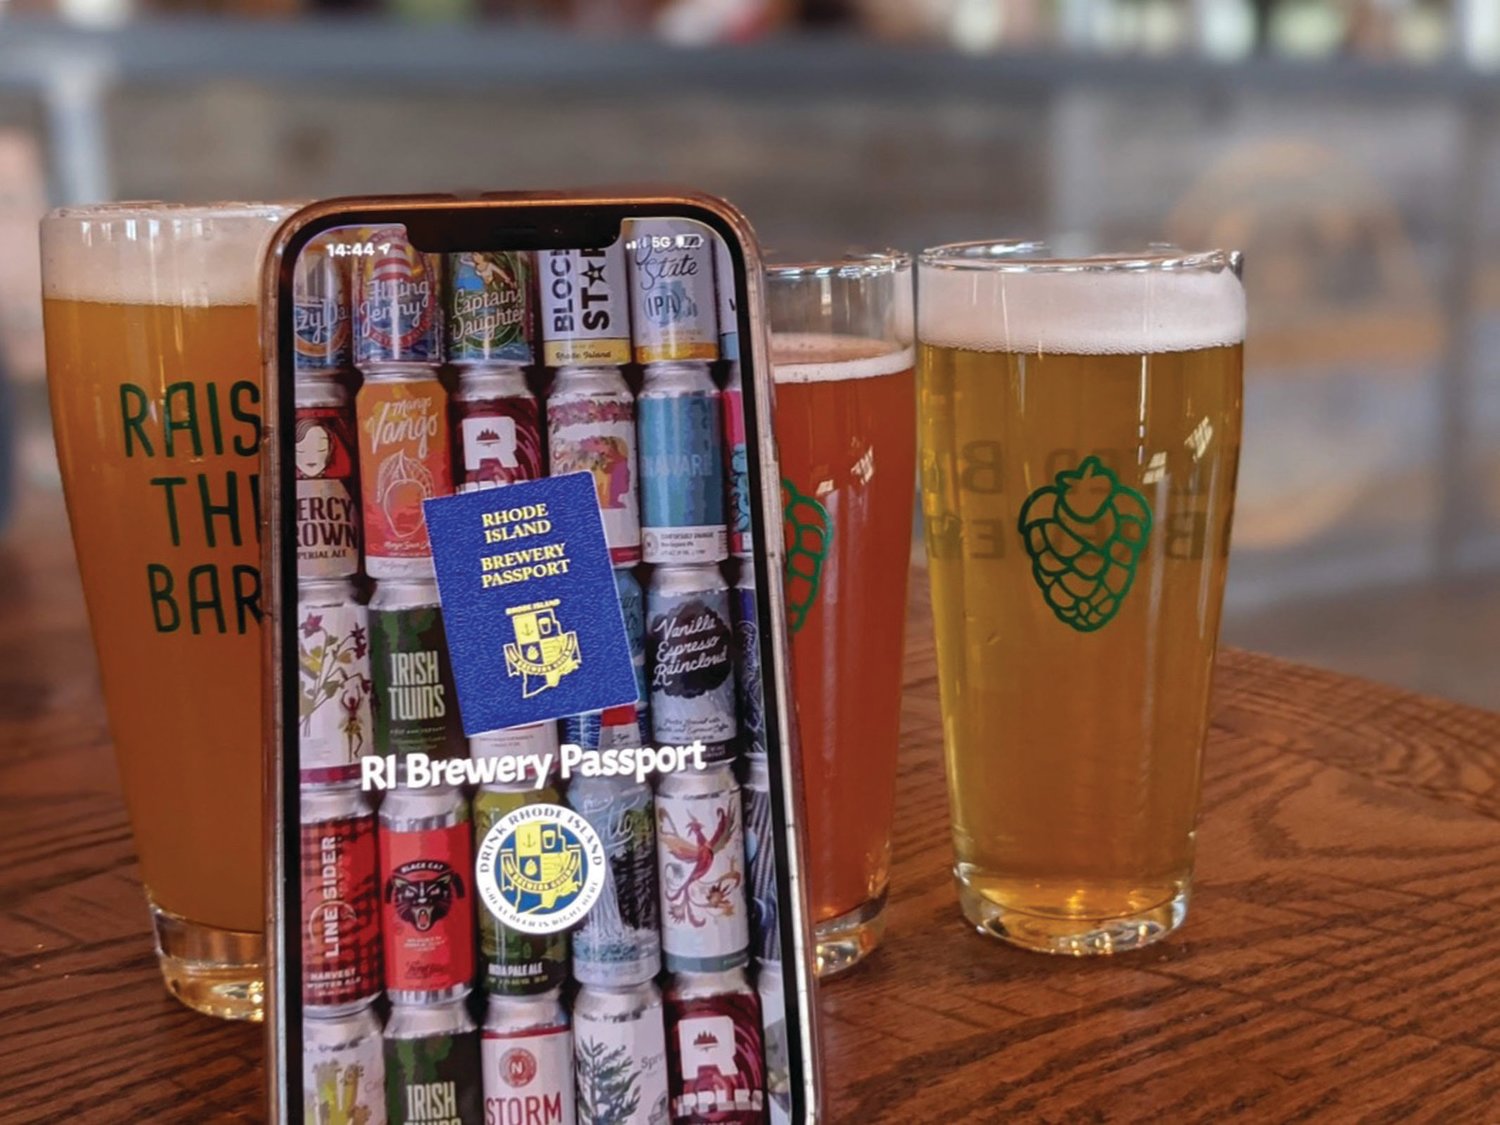 MOBILE GUIDE: The Brewery Passport app helps people discover new local breweries and plan routes to visit multiple spots. It’s a helpful way to keep track of where you’ve been.